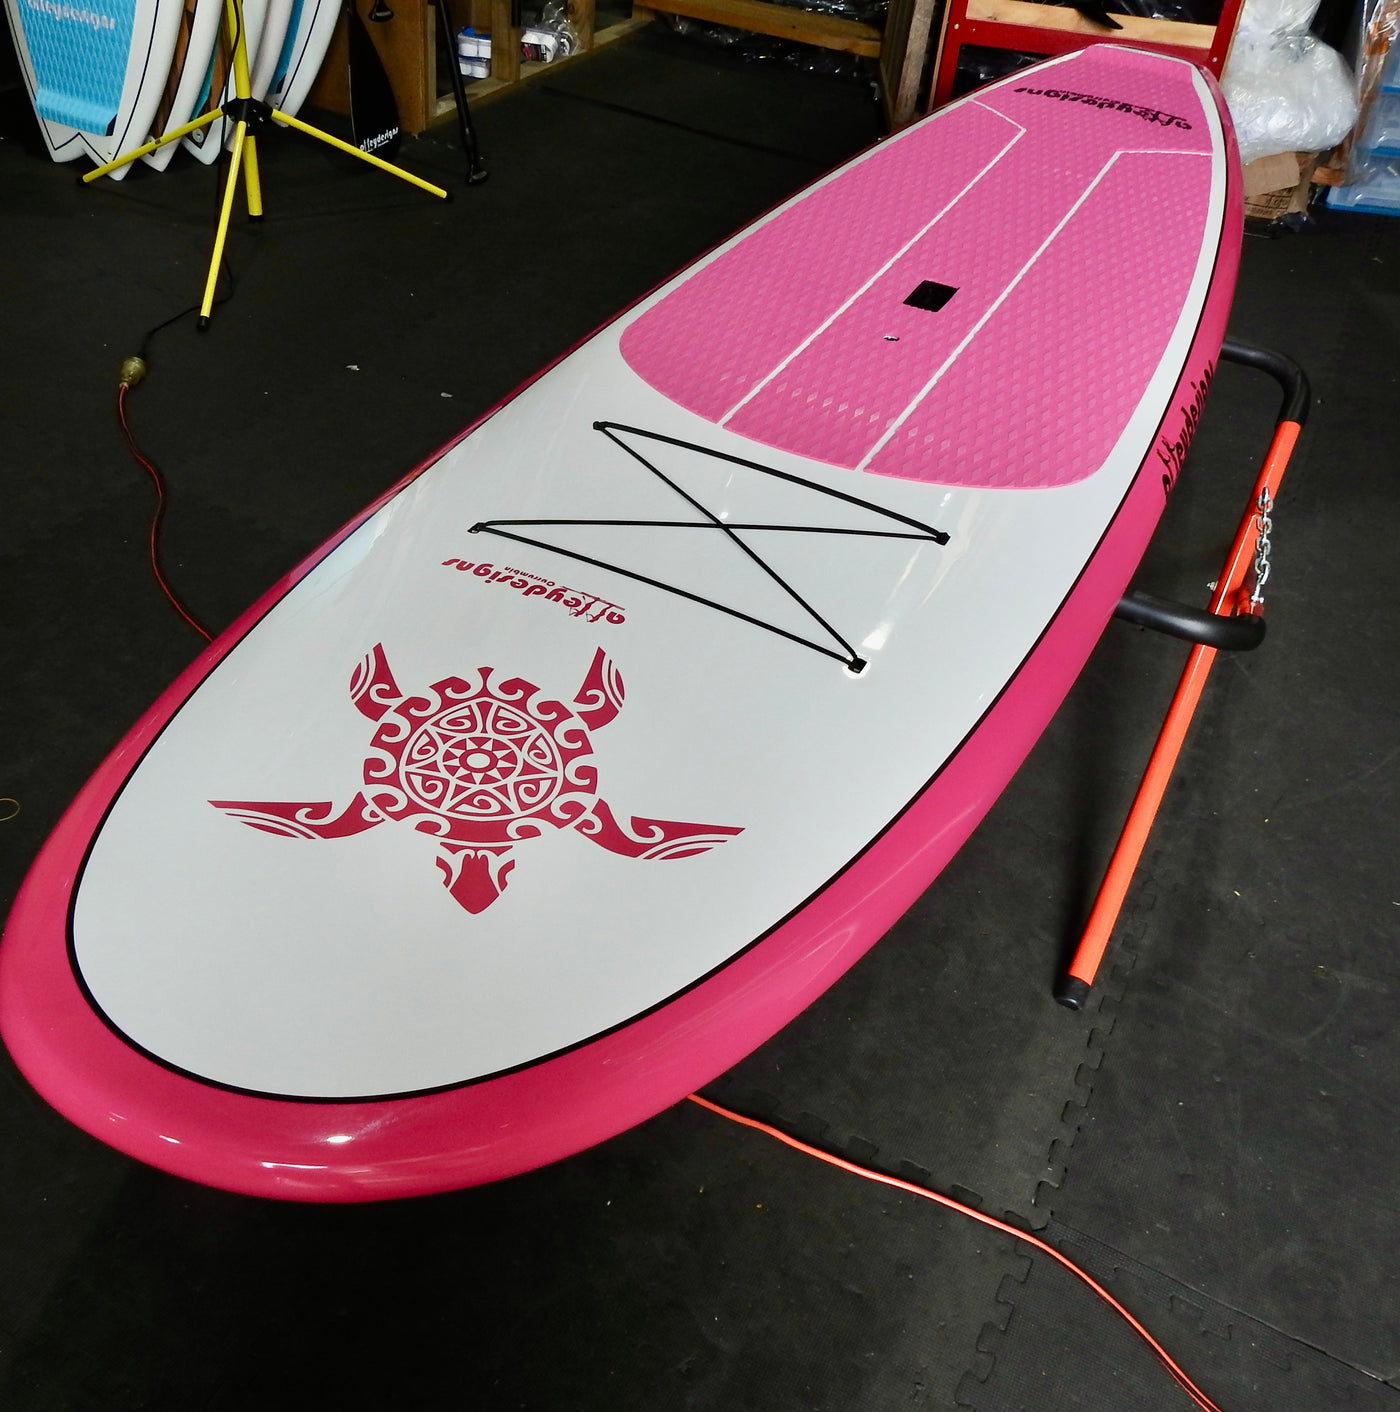 10’6”x 32” Pink Turtle And White Thermo Mould Family Alleydesigns SUP - Alleydesigns  Pty Ltd                                             ABN: 44165571264